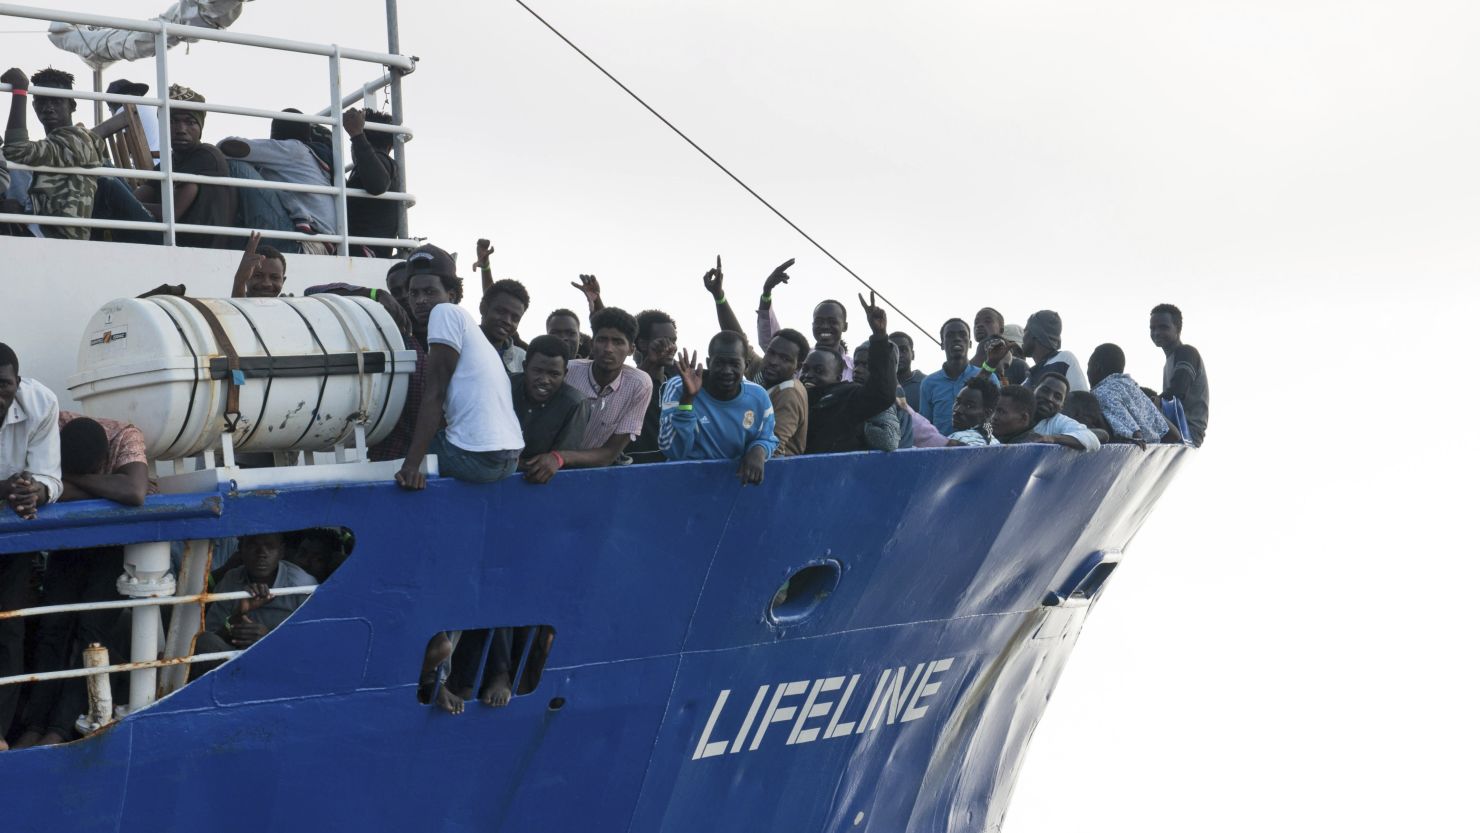 The migrants were rescued by the Lifeline last Thursday.